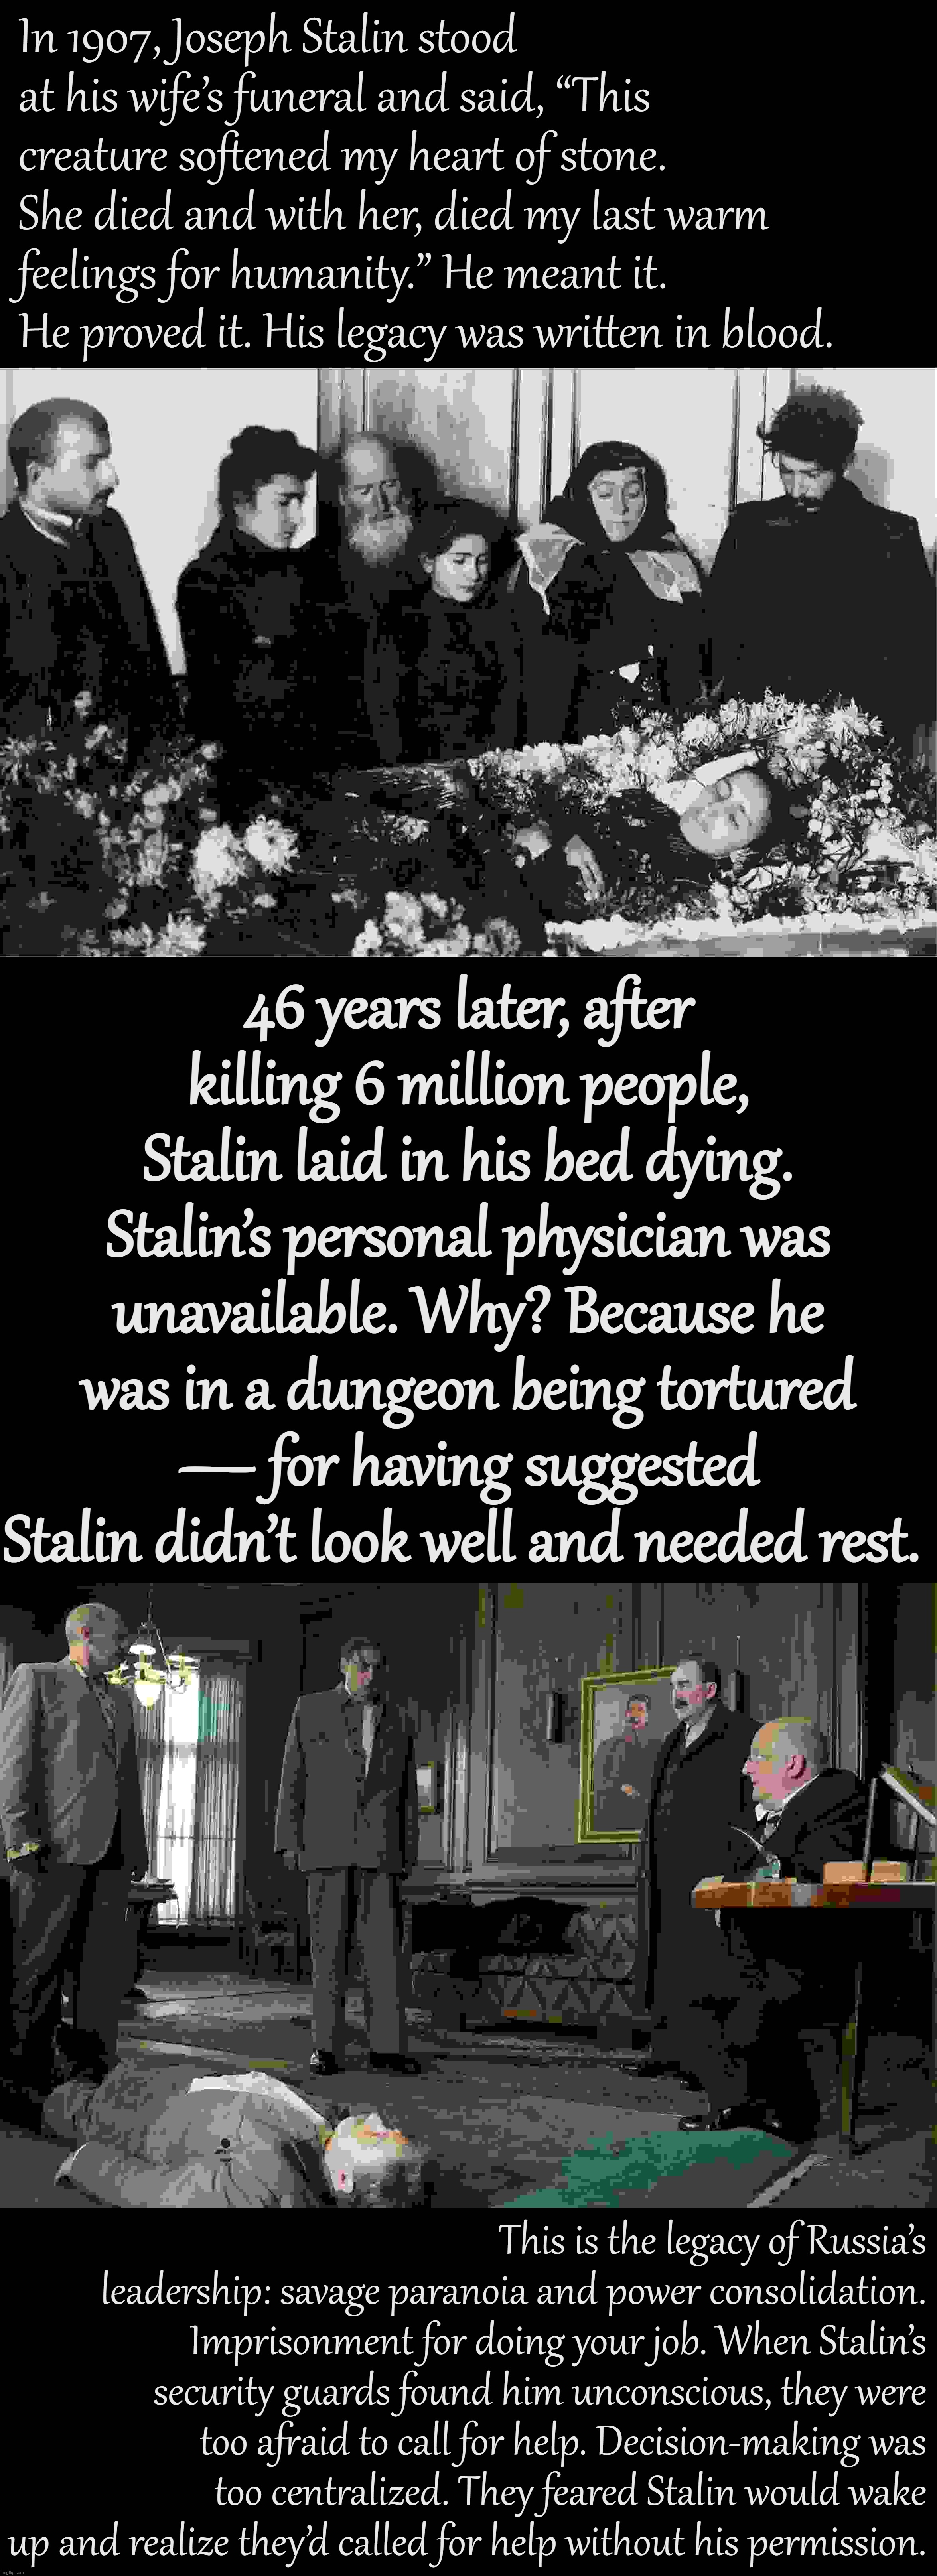 Stalin died how he lived. | In 1907, Joseph Stalin stood at his wife’s funeral and said, “This creature softened my heart of stone. She died and with her, died my last warm feelings for humanity.” He meant it. He proved it. His legacy was written in blood. 46 years later, after killing 6 million people, Stalin laid in his bed dying. Stalin’s personal physician was unavailable. Why? Because he was in a dungeon being tortured — for having suggested Stalin didn’t look well and needed rest. This is the legacy of Russia’s leadership: savage paranoia and power consolidation. Imprisonment for doing your job. When Stalin’s security guards found him unconscious, they were too afraid to call for help. Decision-making was too centralized. They feared Stalin would wake up and realize they’d called for help without his permission. | image tagged in stalin at wife's funeral 1907,death of stalin | made w/ Imgflip meme maker